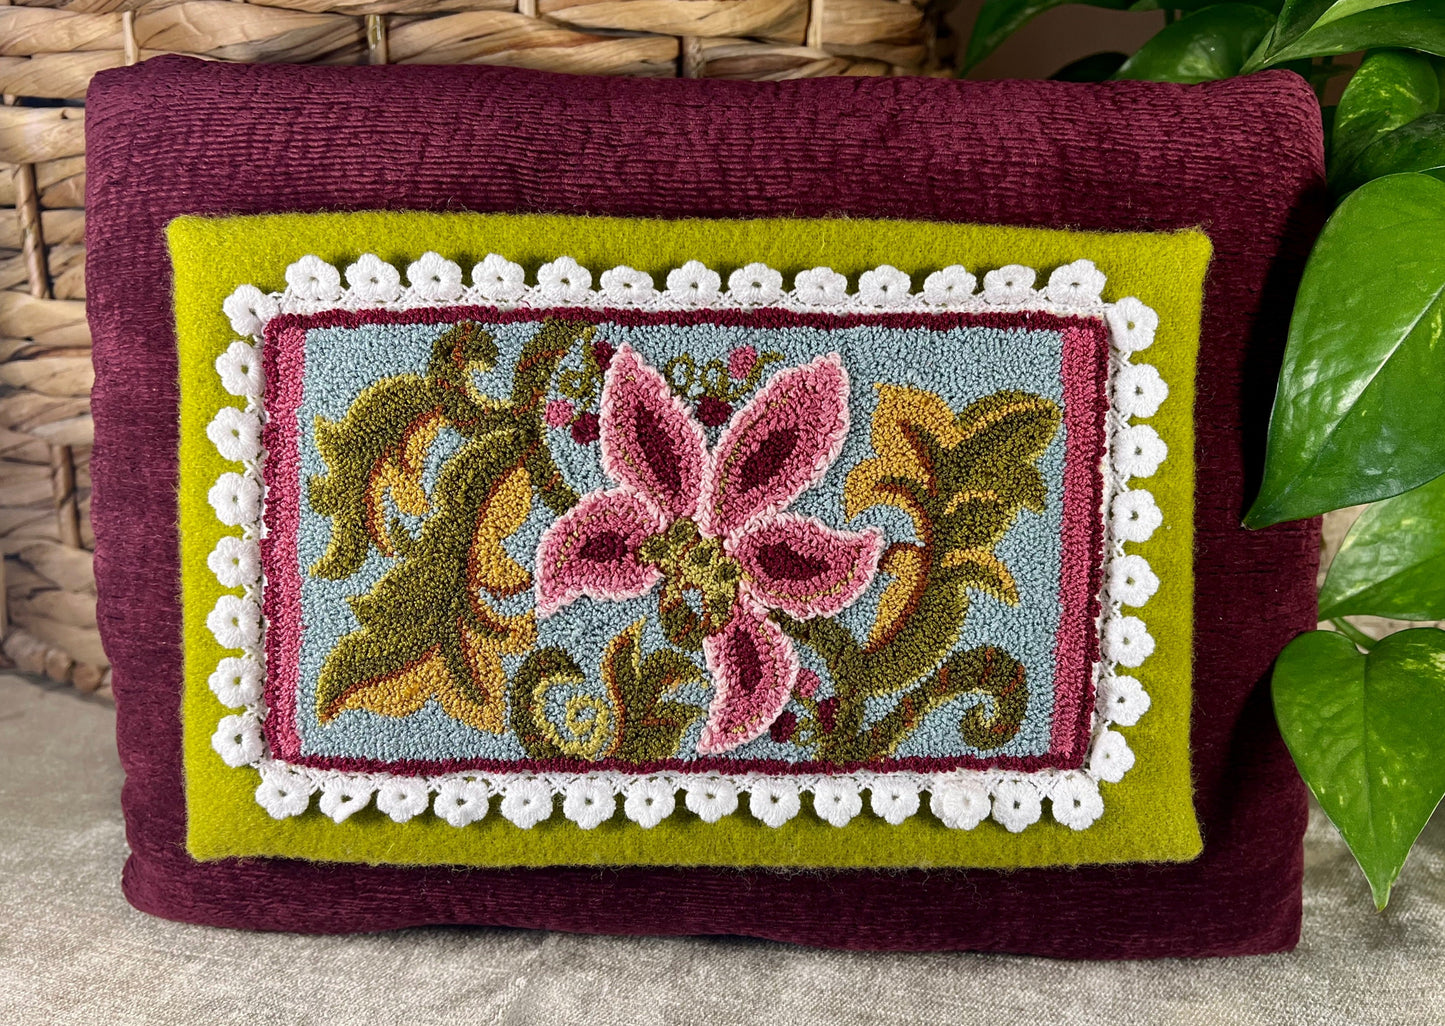 The Vines of Summer is a beautiful Punch Needle Embroidery pattern by Orphaned Wool. This pattern is available in a paper or cloth pattern options. Copyright 2023 Kelly Kanyok Orphaned Wool.